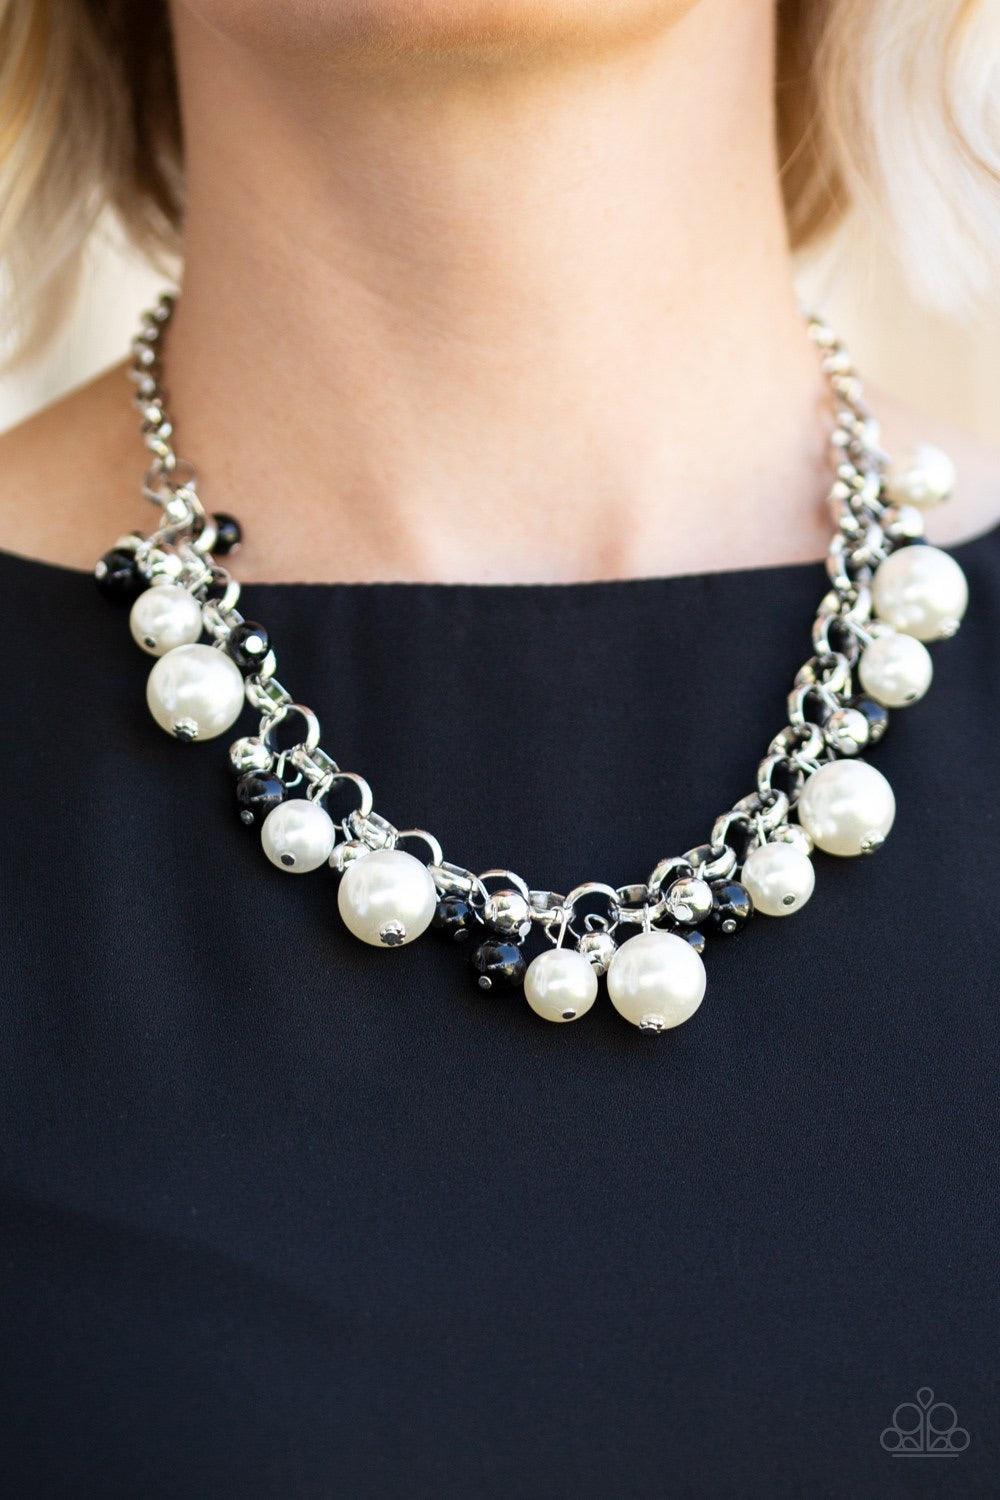 Paparazzi Accessories The Upstater - Black Varying in size, bubbly white pearls, classic silver beads, and shiny black beads swing from the bottom of a glistening silver chain, creating a refined fringe below the collar. Features an adjustable clasp closu